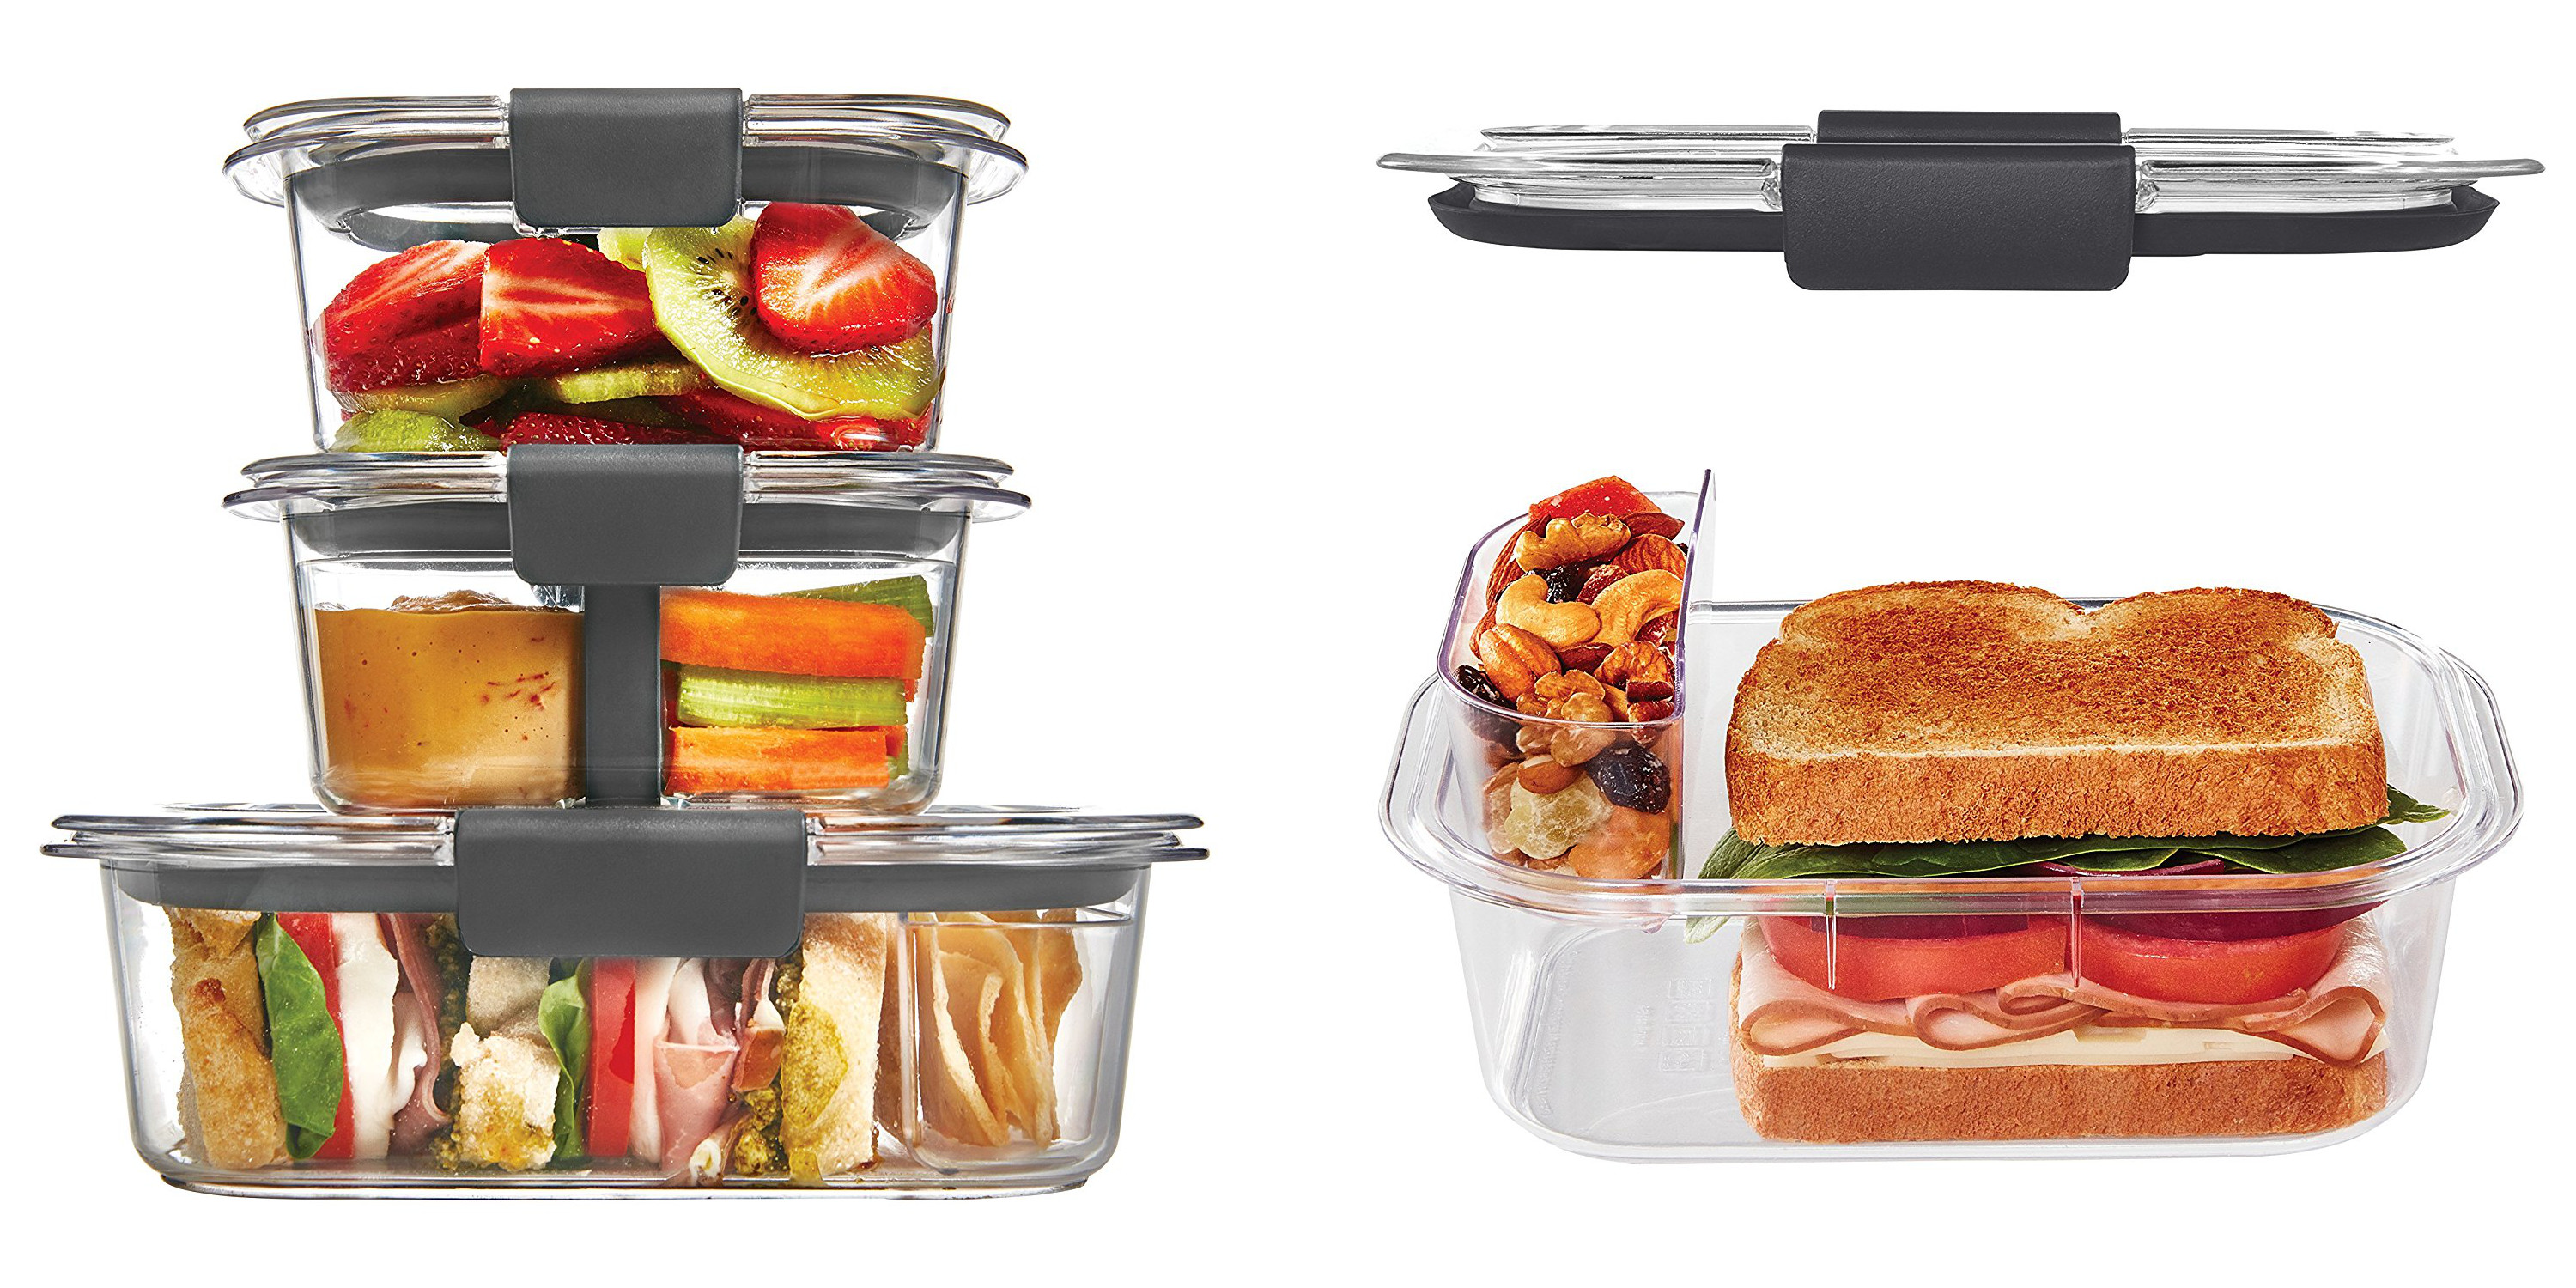 https://9to5toys.com/wp-content/uploads/sites/5/2017/08/rubbermaid-brilliance-sandwich-snack-lunch-container-kit.jpg